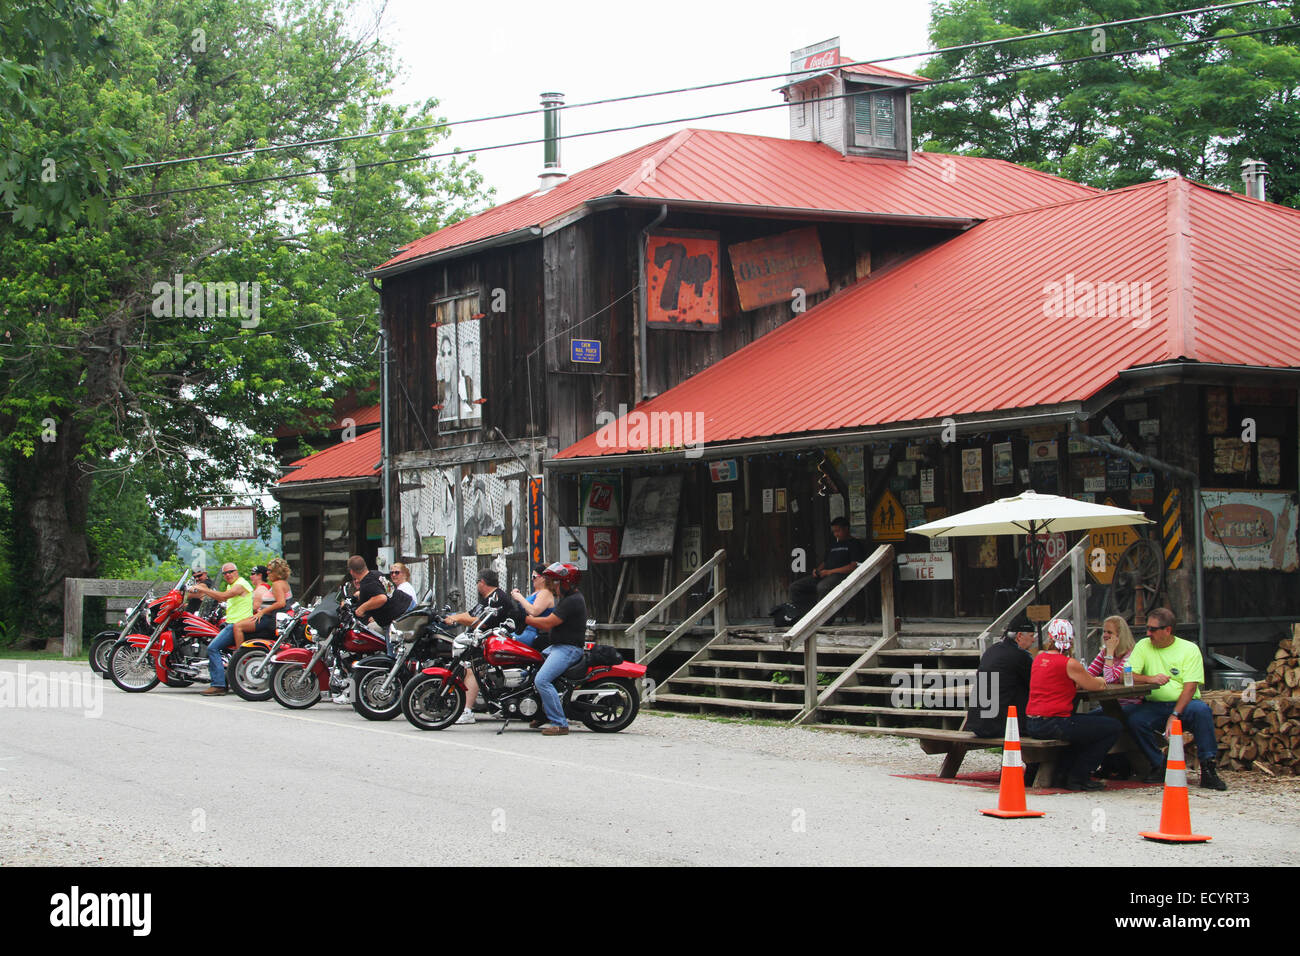 Motorcycle riders enjoy a rest stop at Rabbit Hash, Kentucky, USA. Circa 1813. A historic small town on the Ohio River. Added to Stock Photo